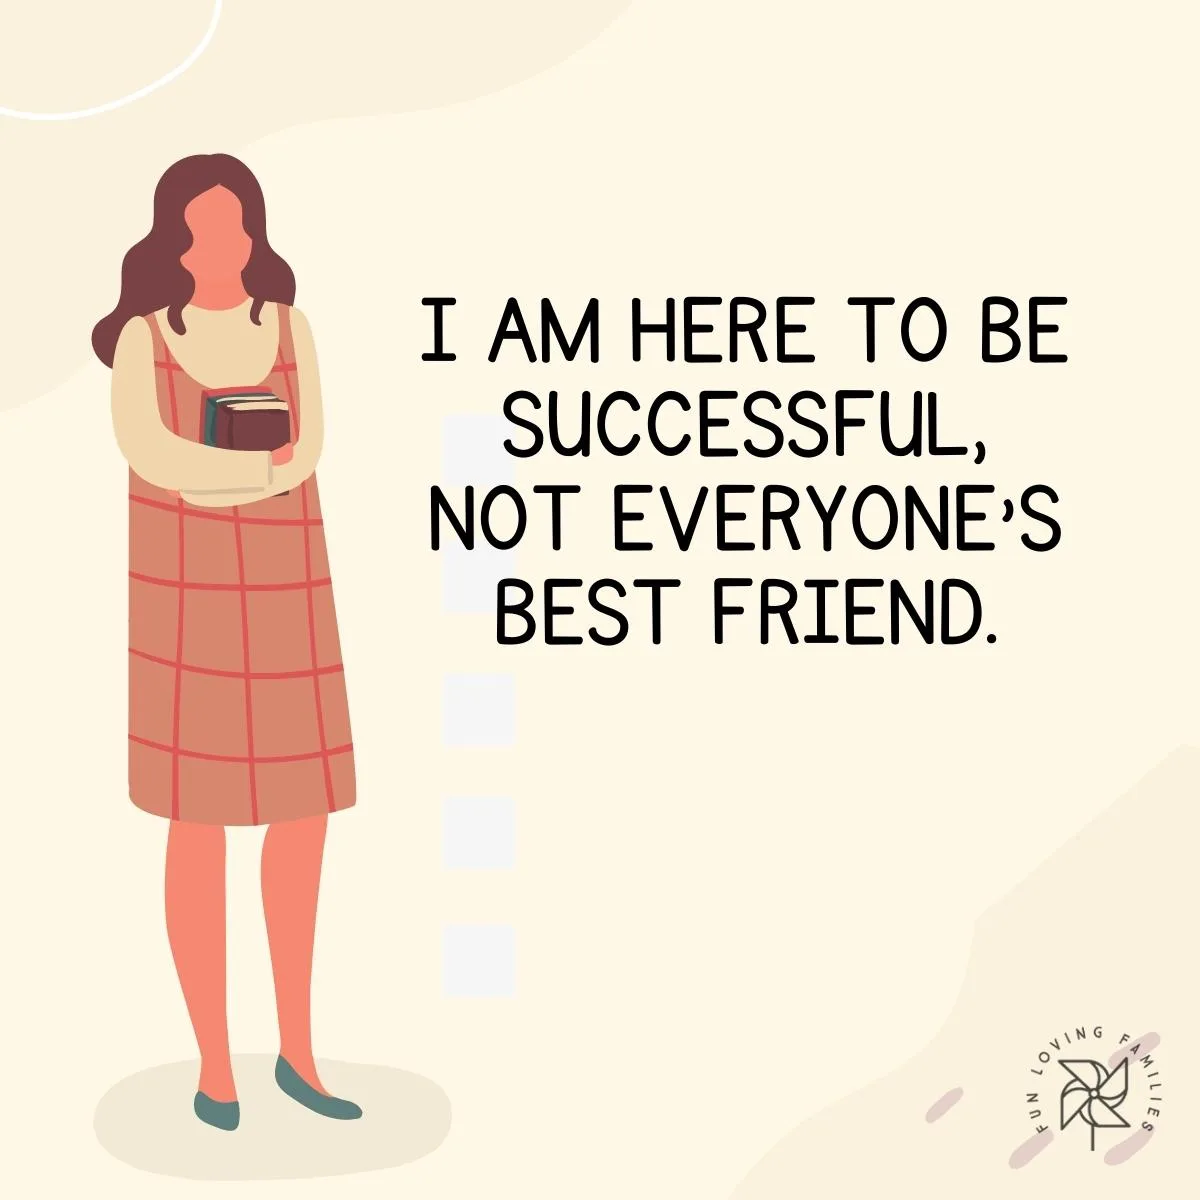 I am here to be successful, not everyone's best friend affirmation